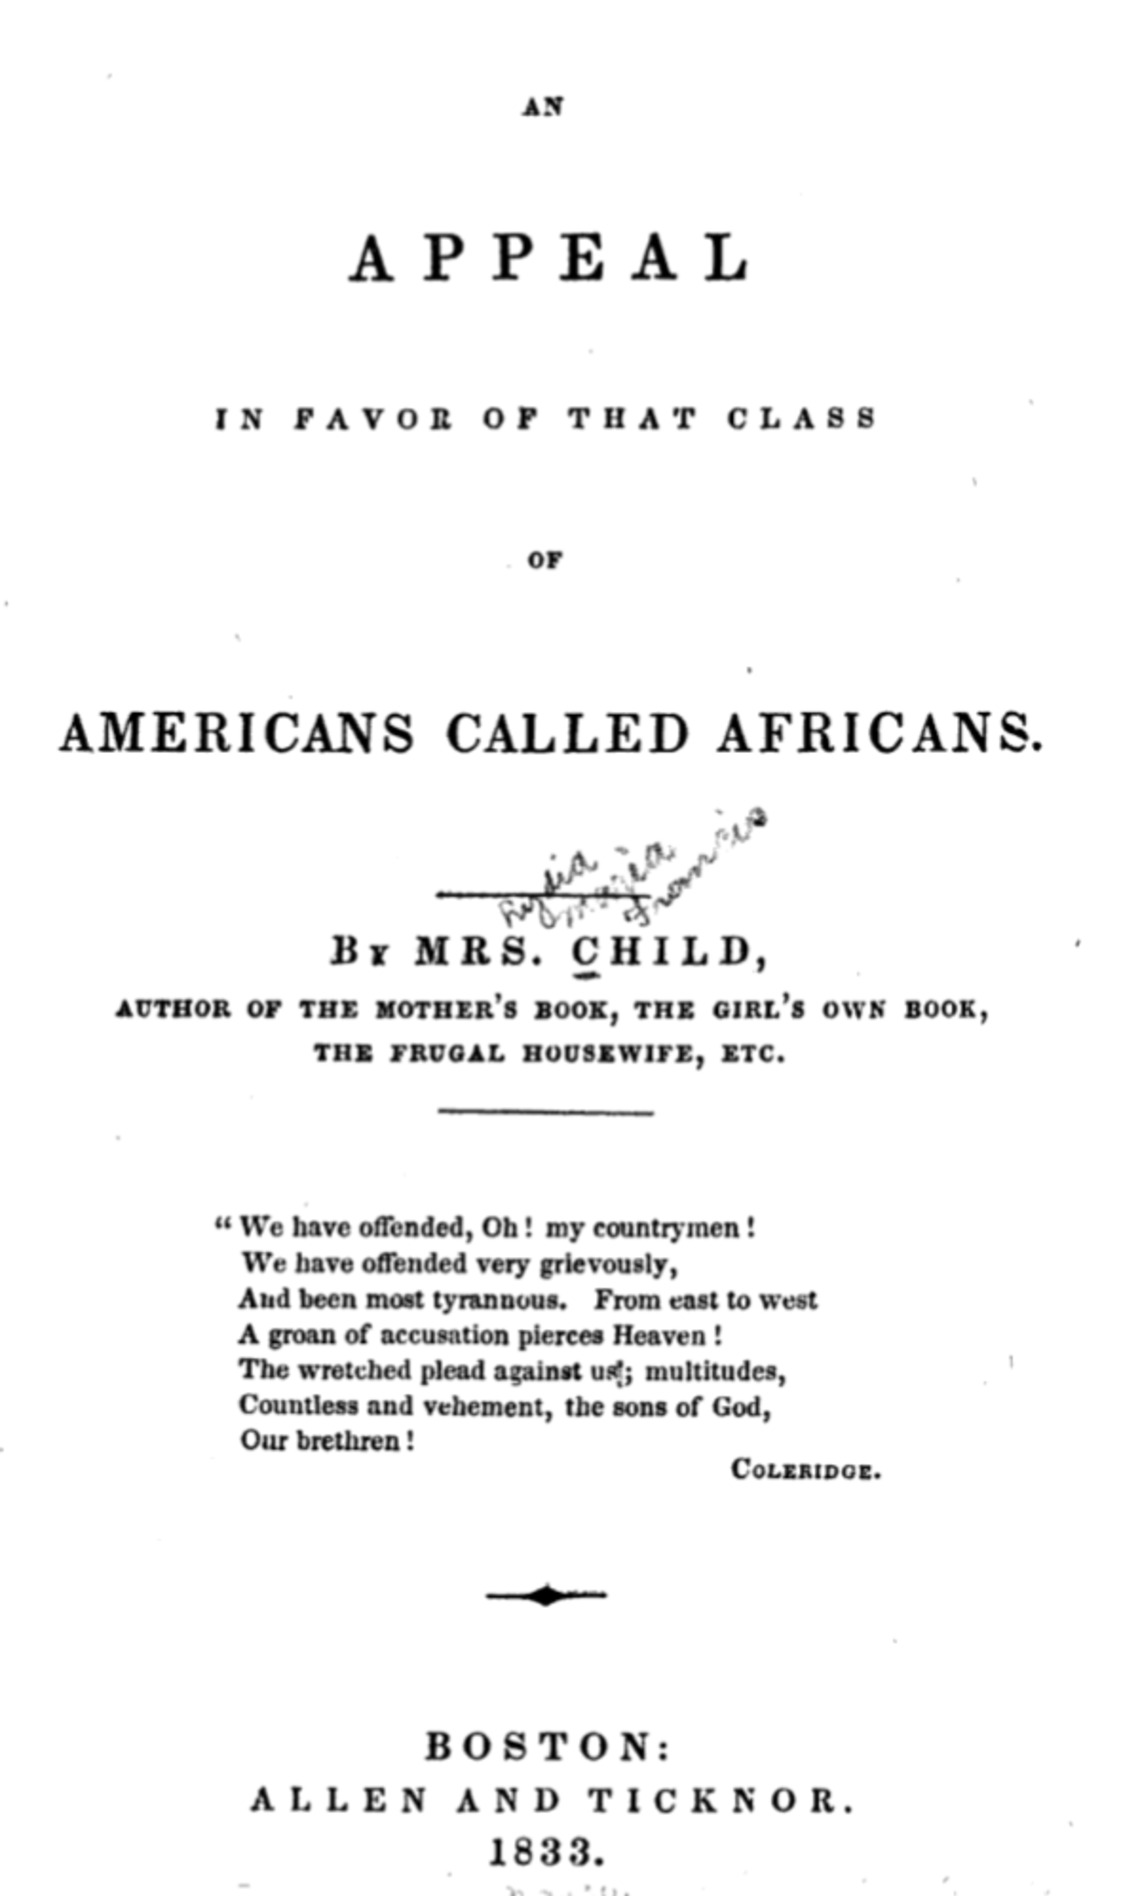 The title page to Lydia Maria Child's <em>An Appeal in Favor of that Class of Americans called Africans</em>. This female-authored anti-racist work was one of the most important politico-philosophic studies of the day.